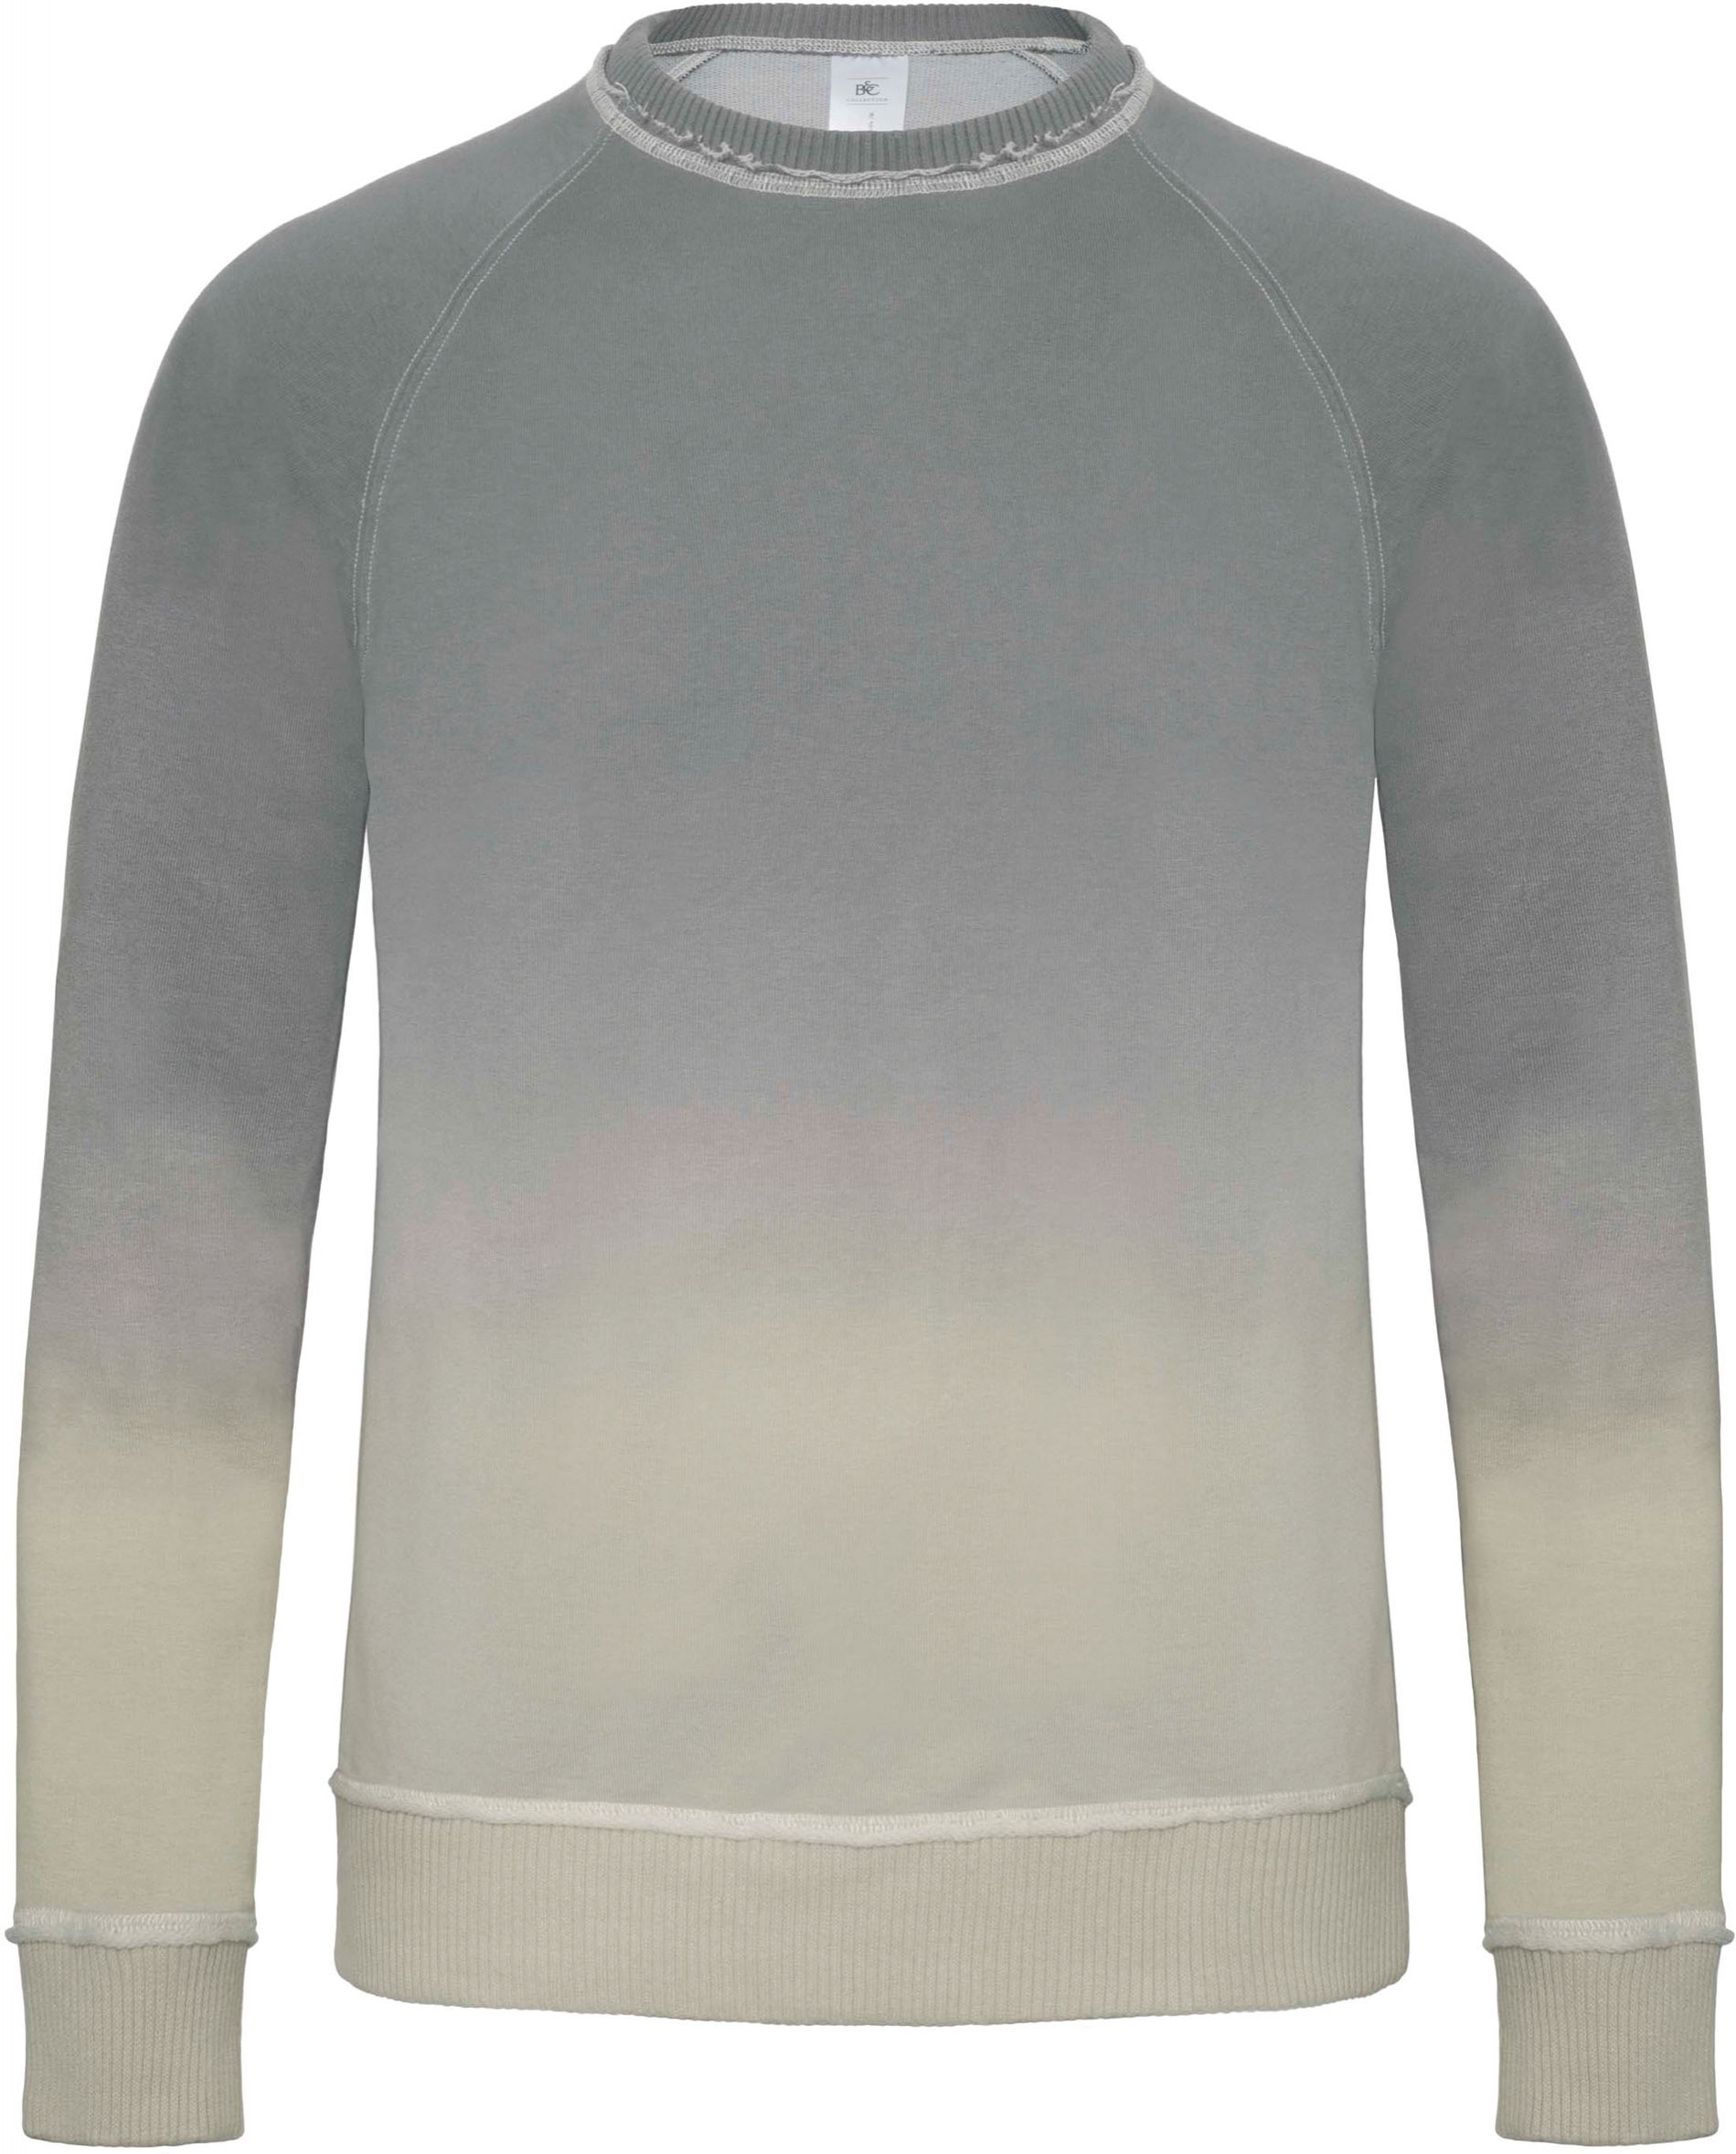 SWEAT-SHIRT DNM INVINCIBLE HOMME Shades of Grey Gris